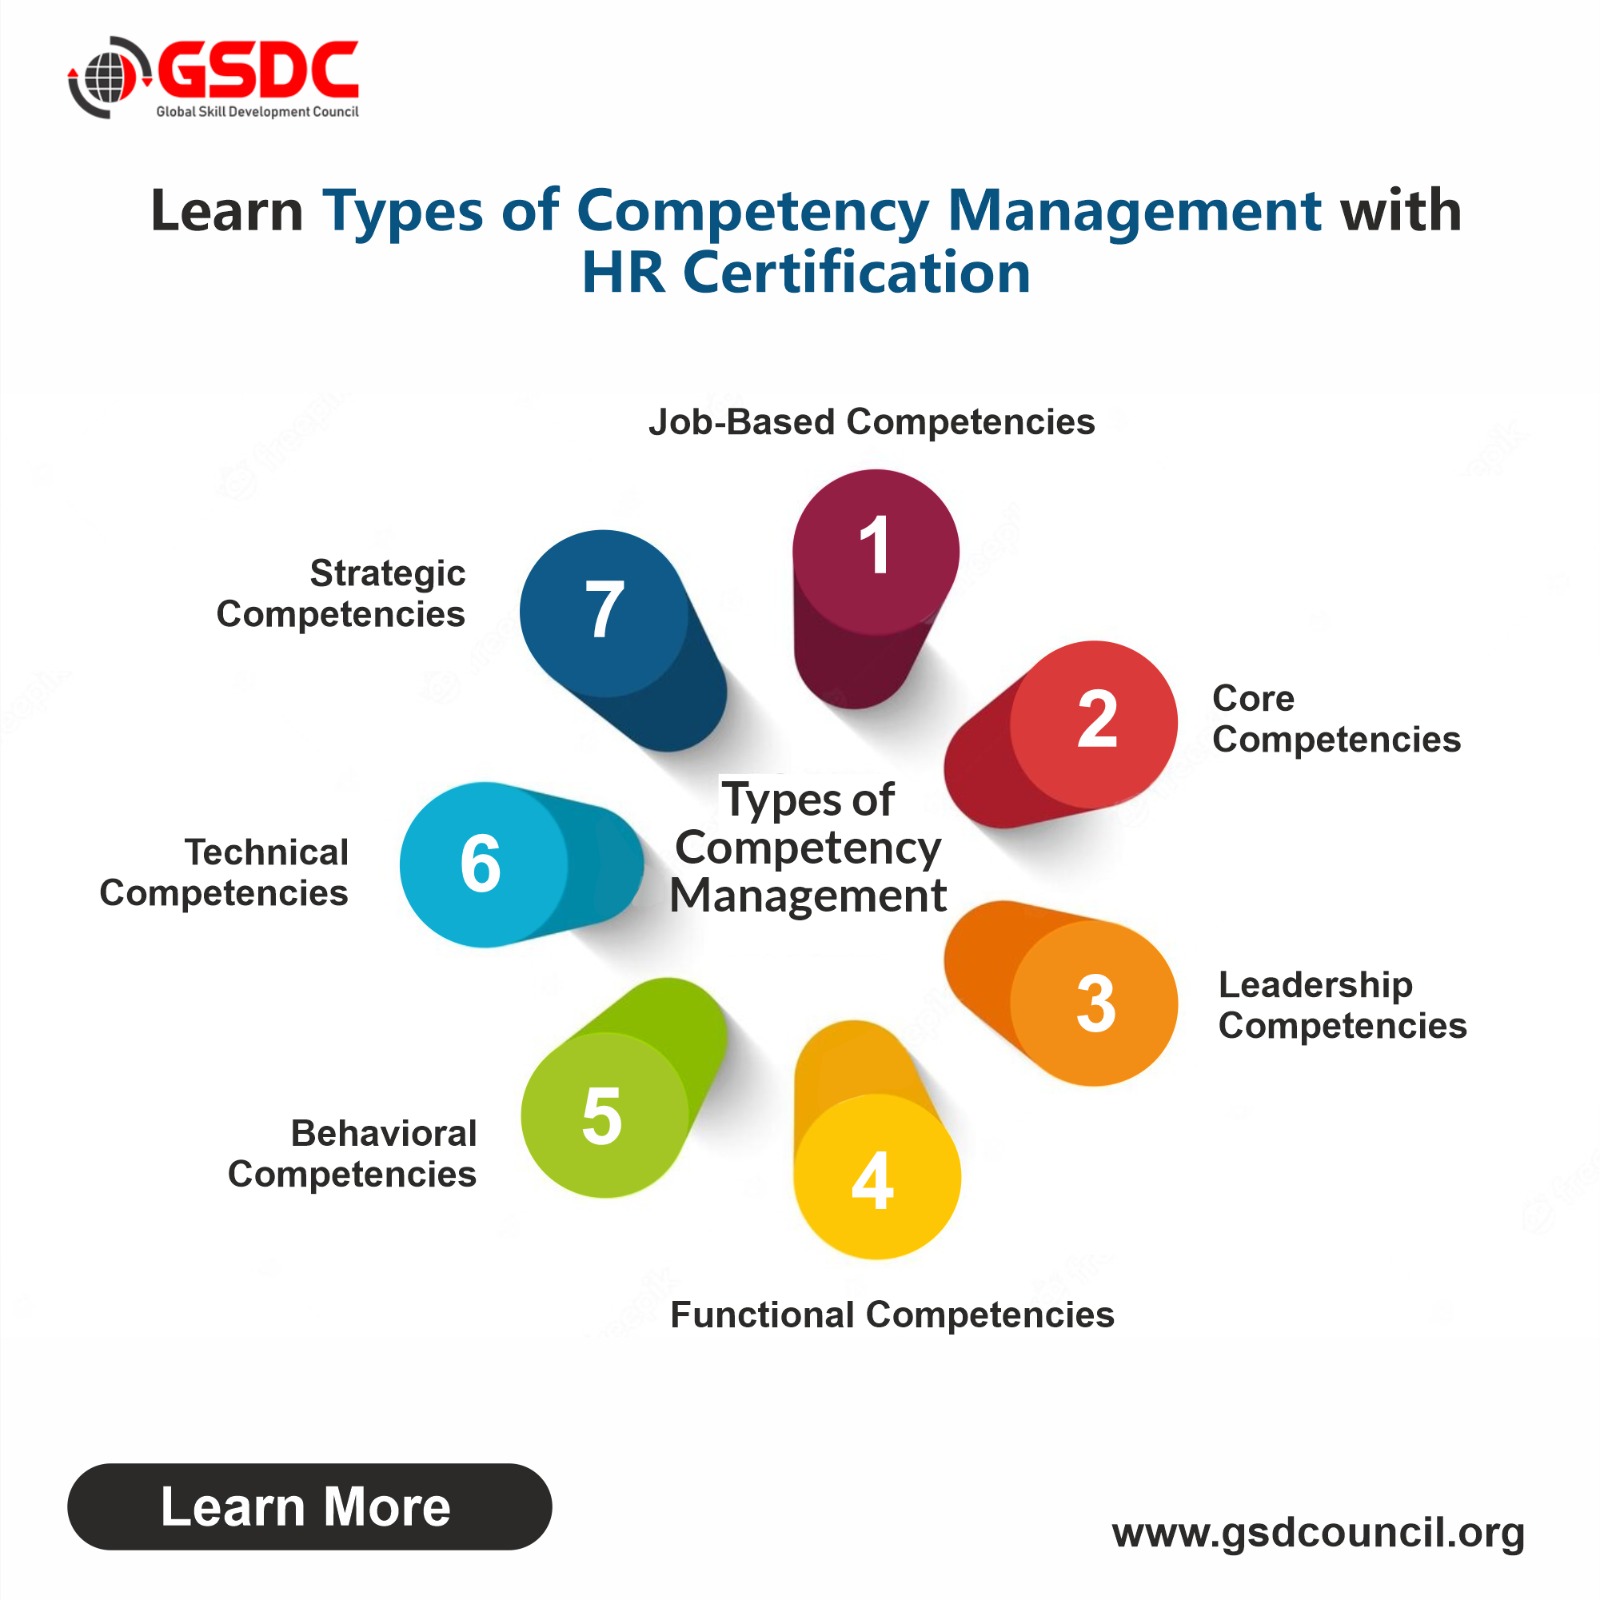 Learn Types of Competency Management with HR Certification